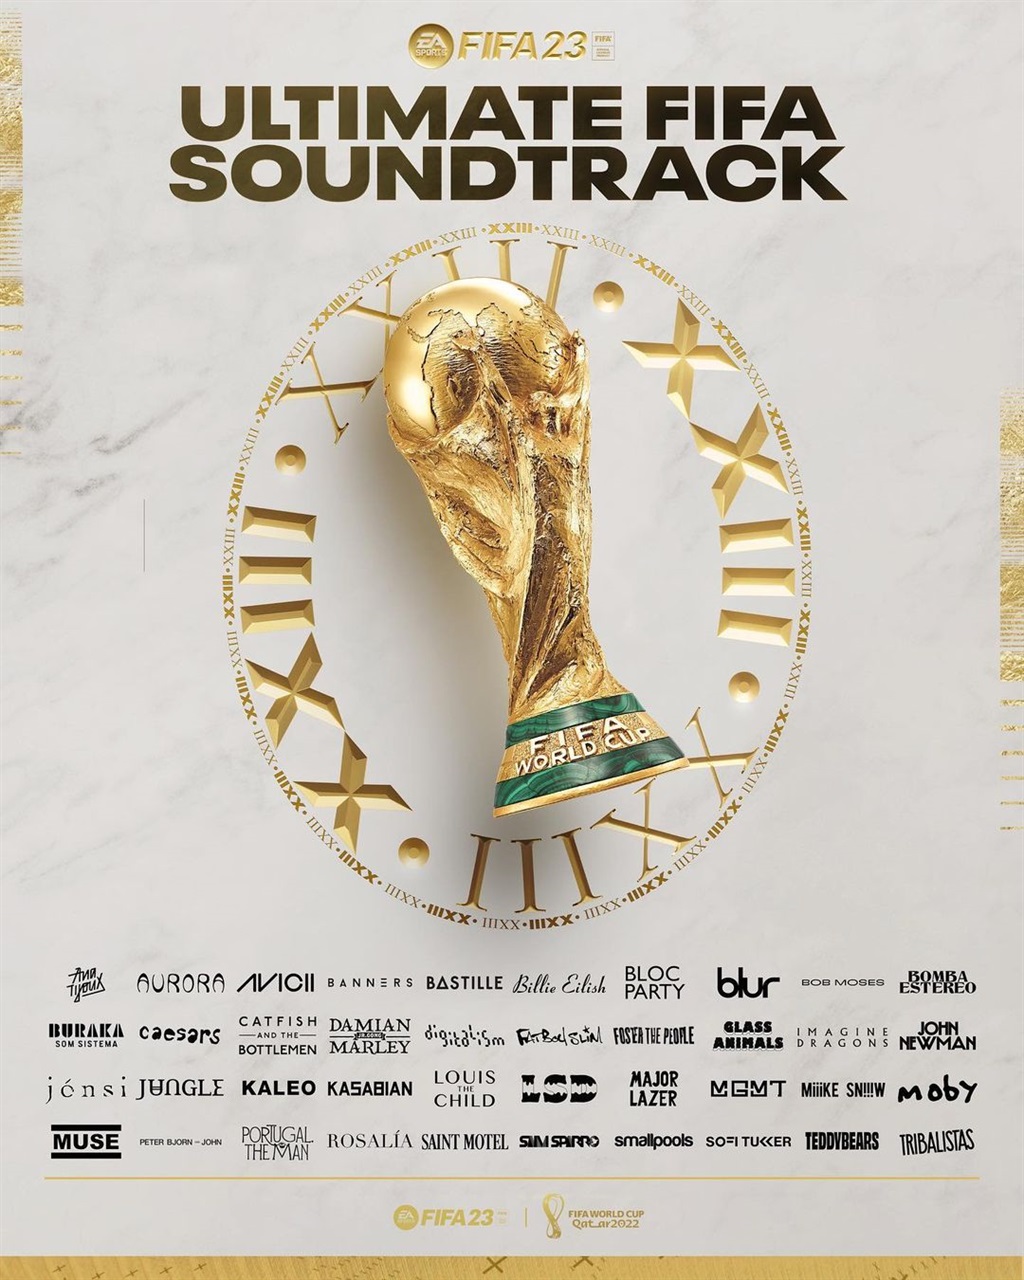 The artists on the final 40 songs for the Ultimate FIFA Soundtrack.